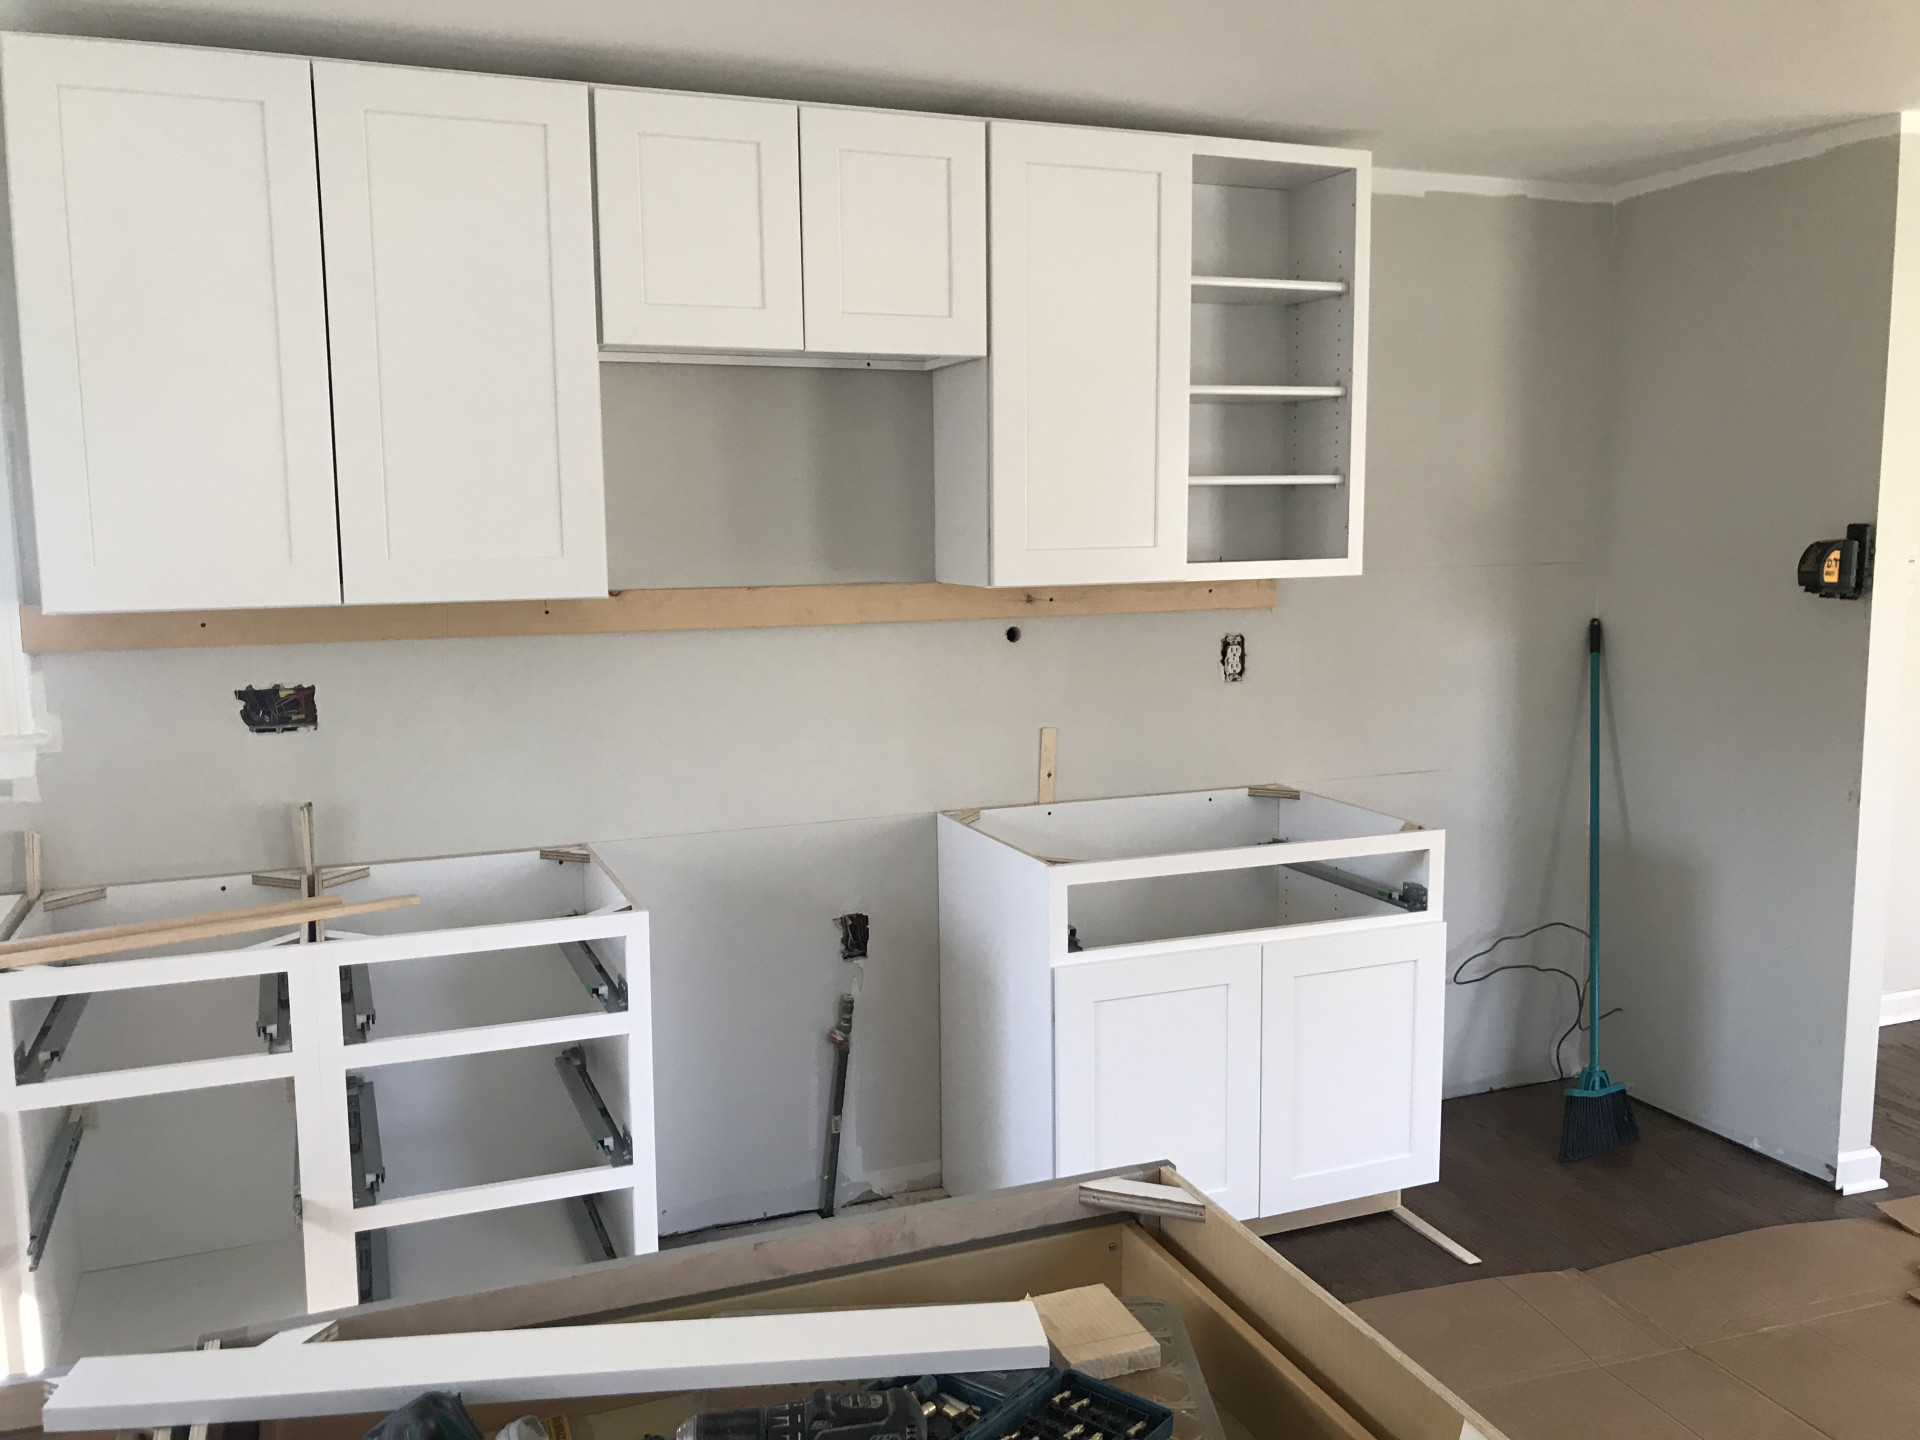 Unfinished Cabinets